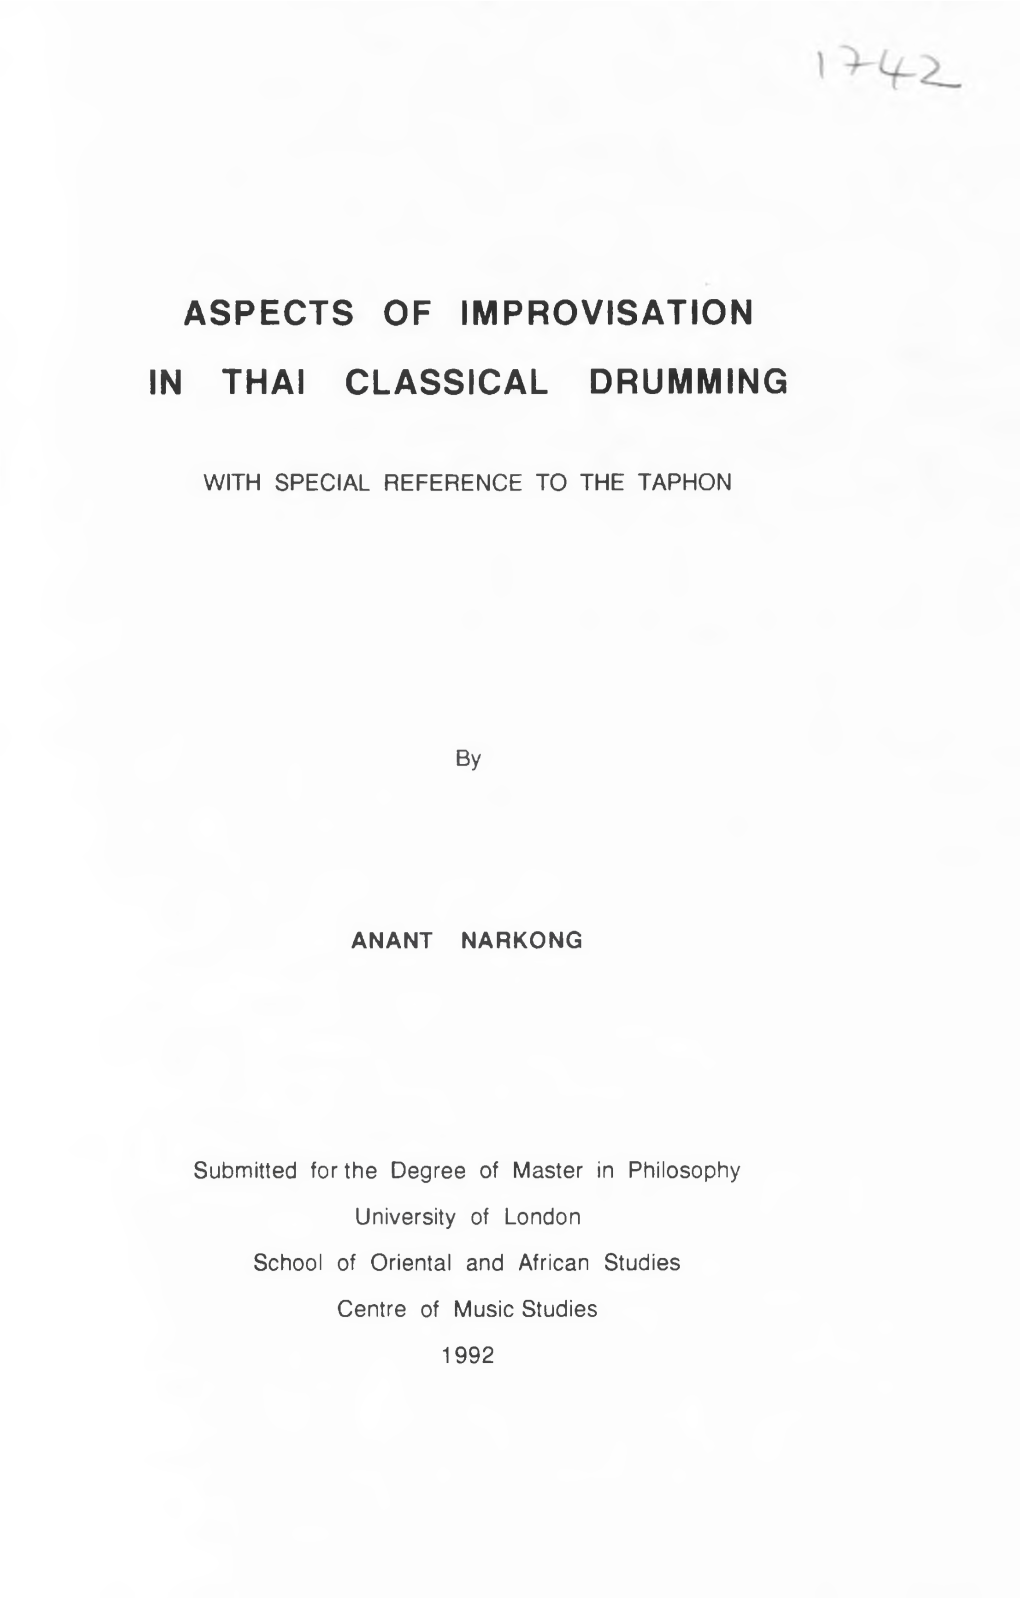 Aspects of Improvisation in Thai Classical